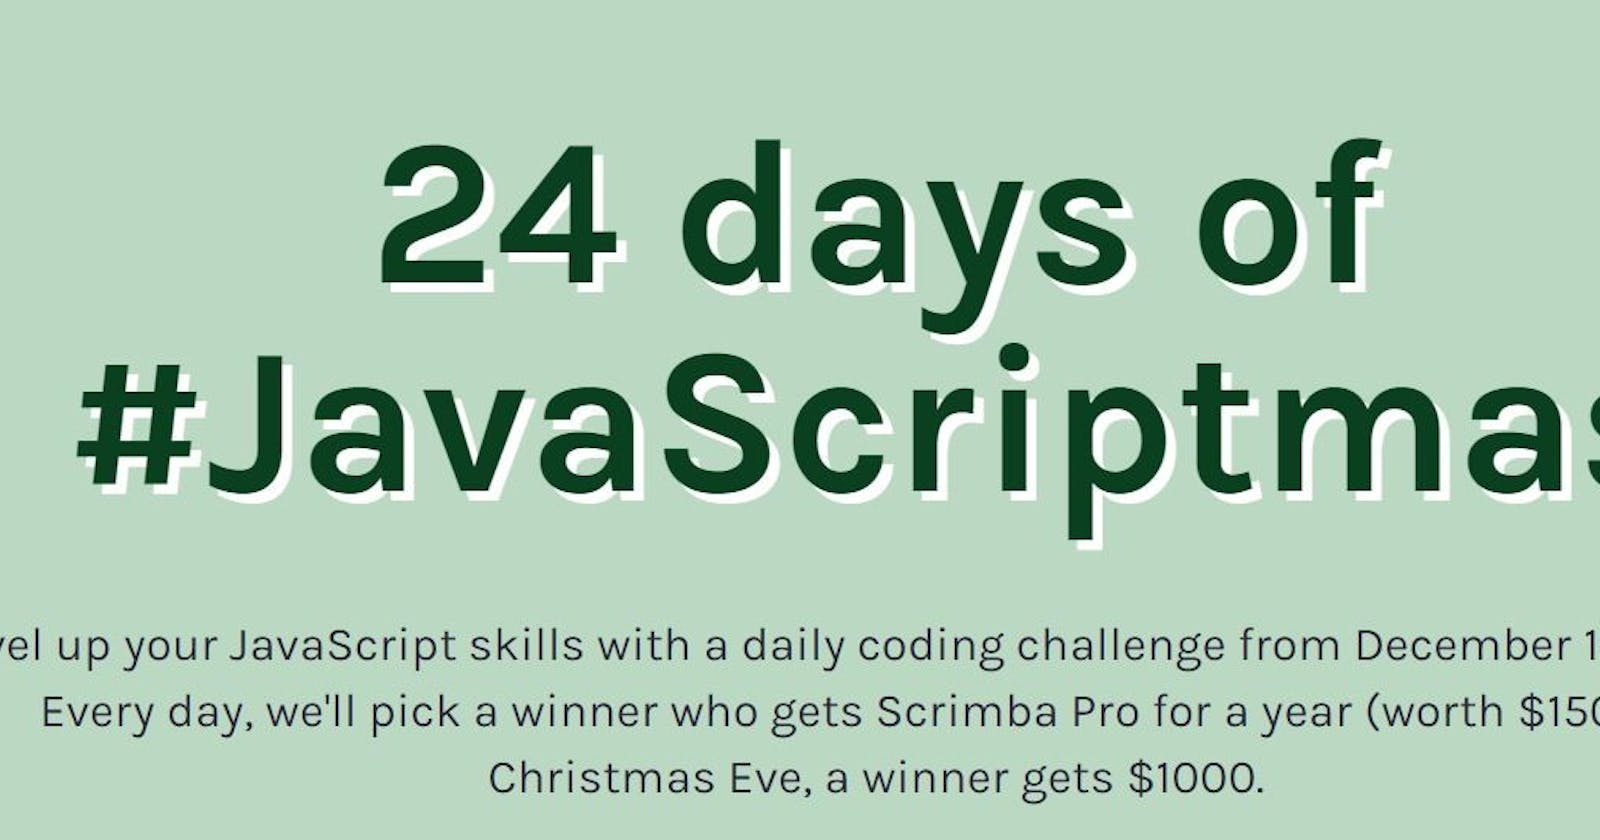 My experience of completing "24 Days of #JavaScriptmas" challenge by Scrimba